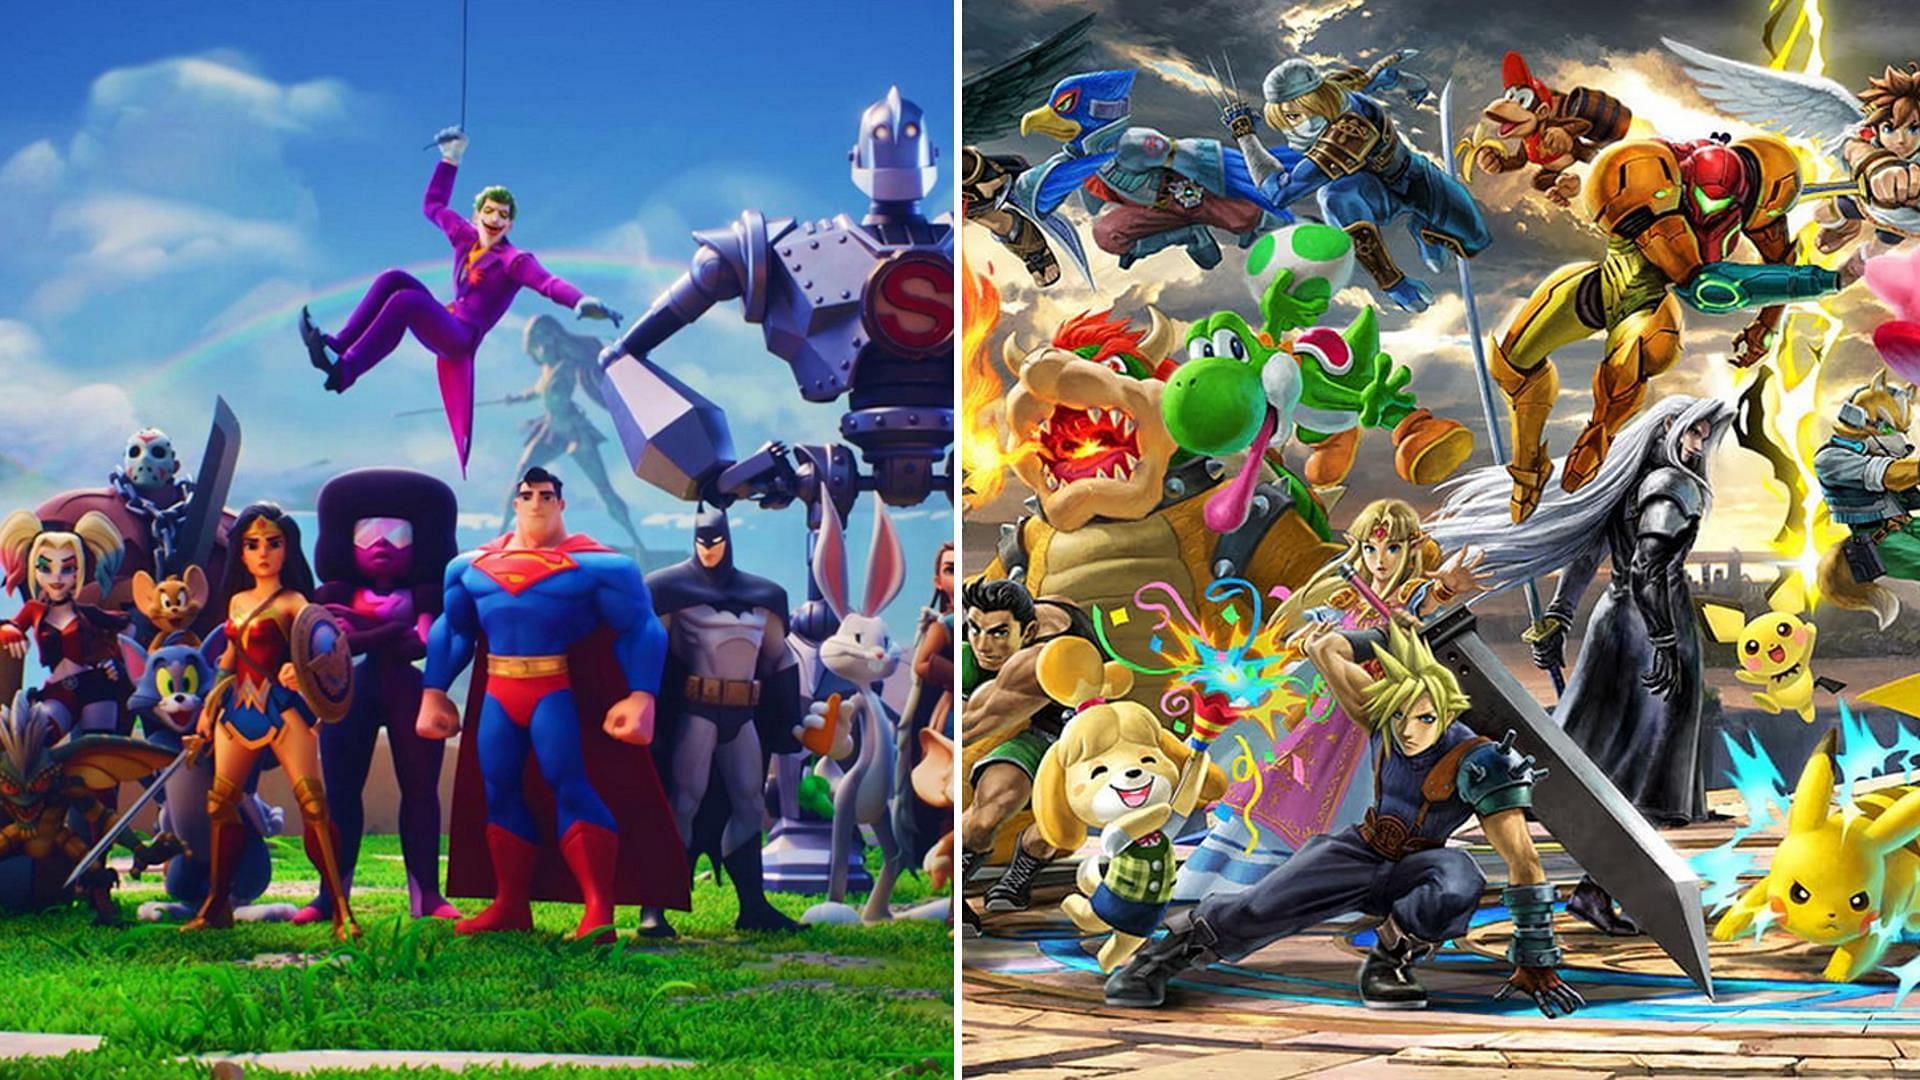 Similarities and differences between Multiversus vs Super Smash Bros